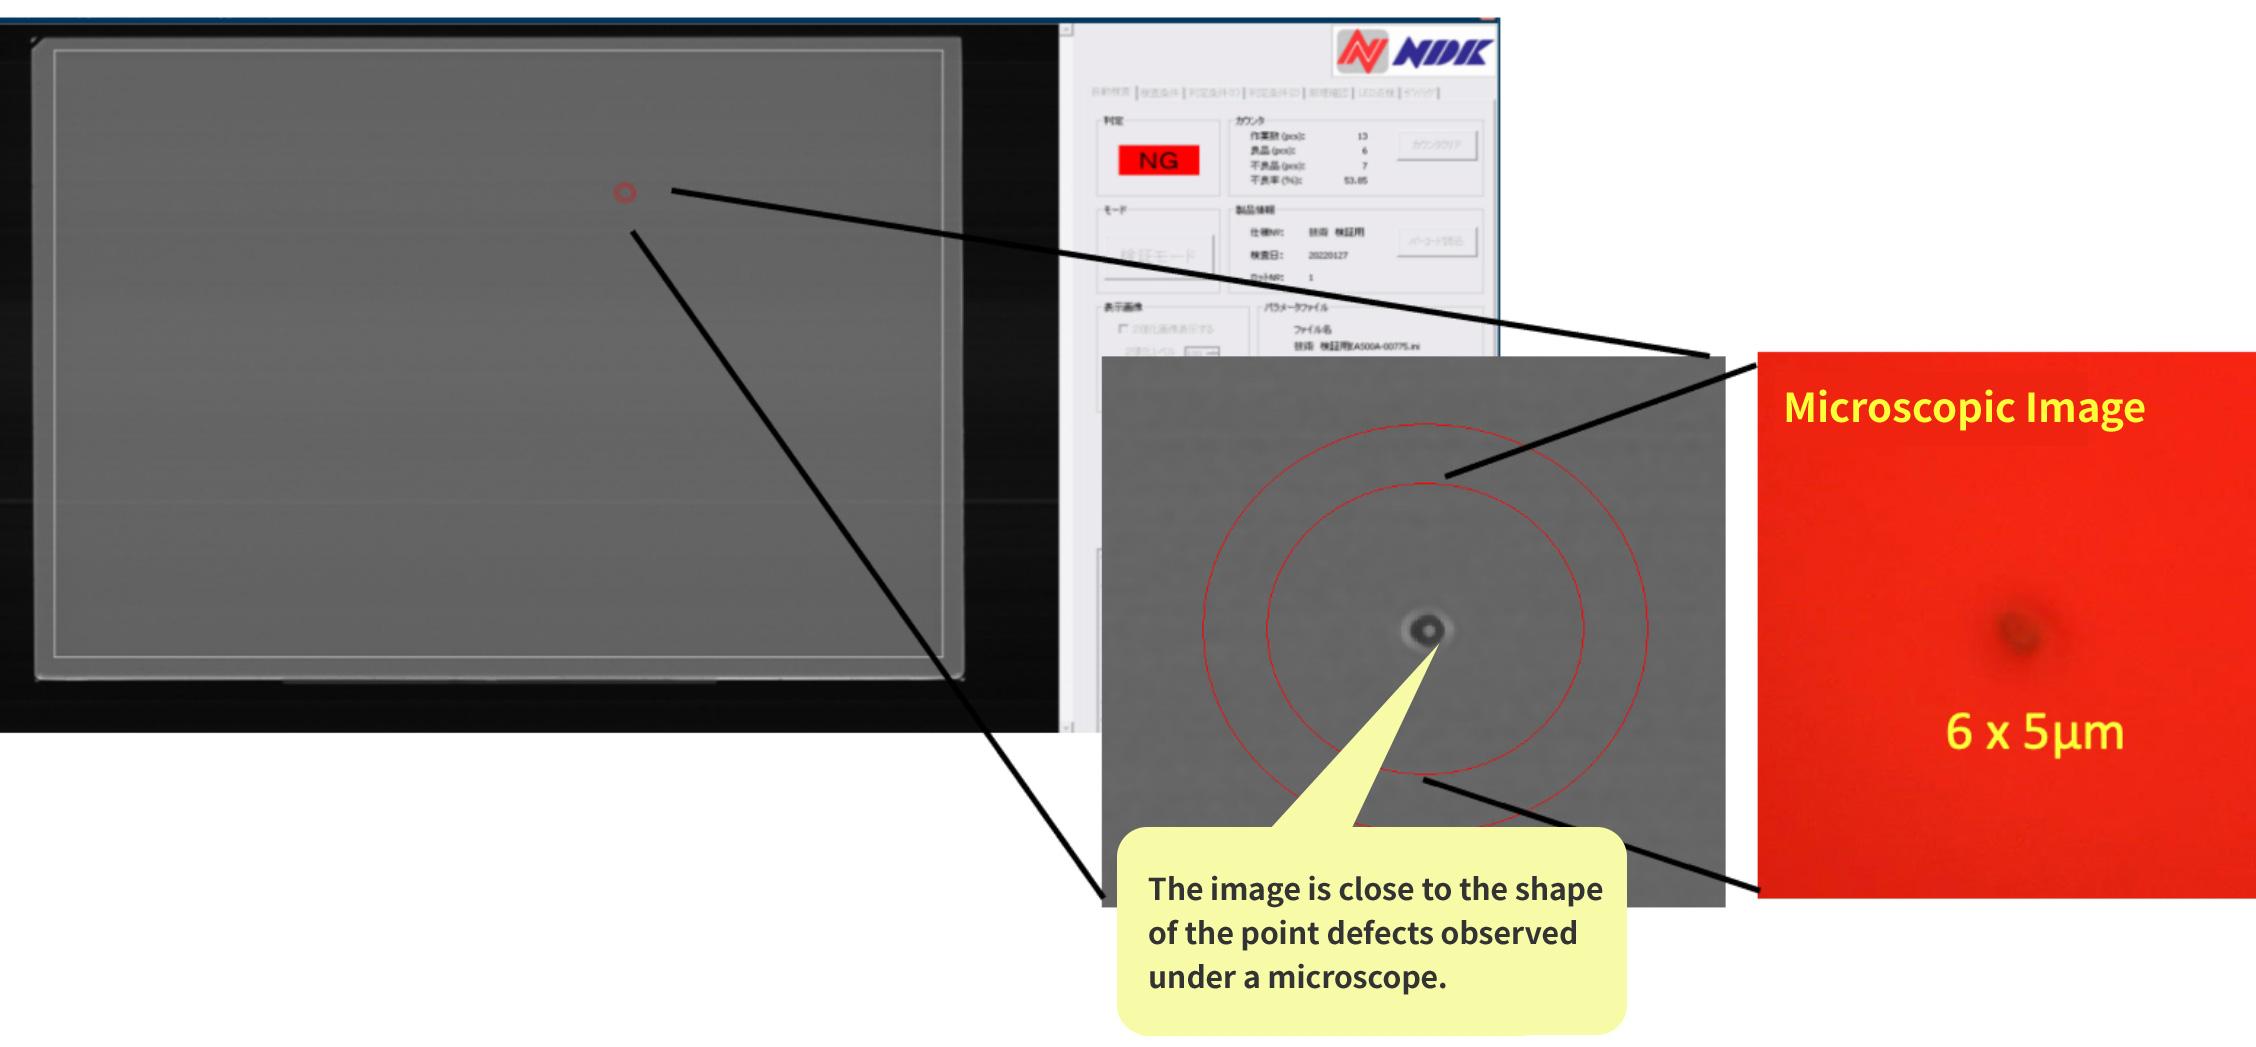 Visibility of Point Defects on Automatic Inspection Equipment